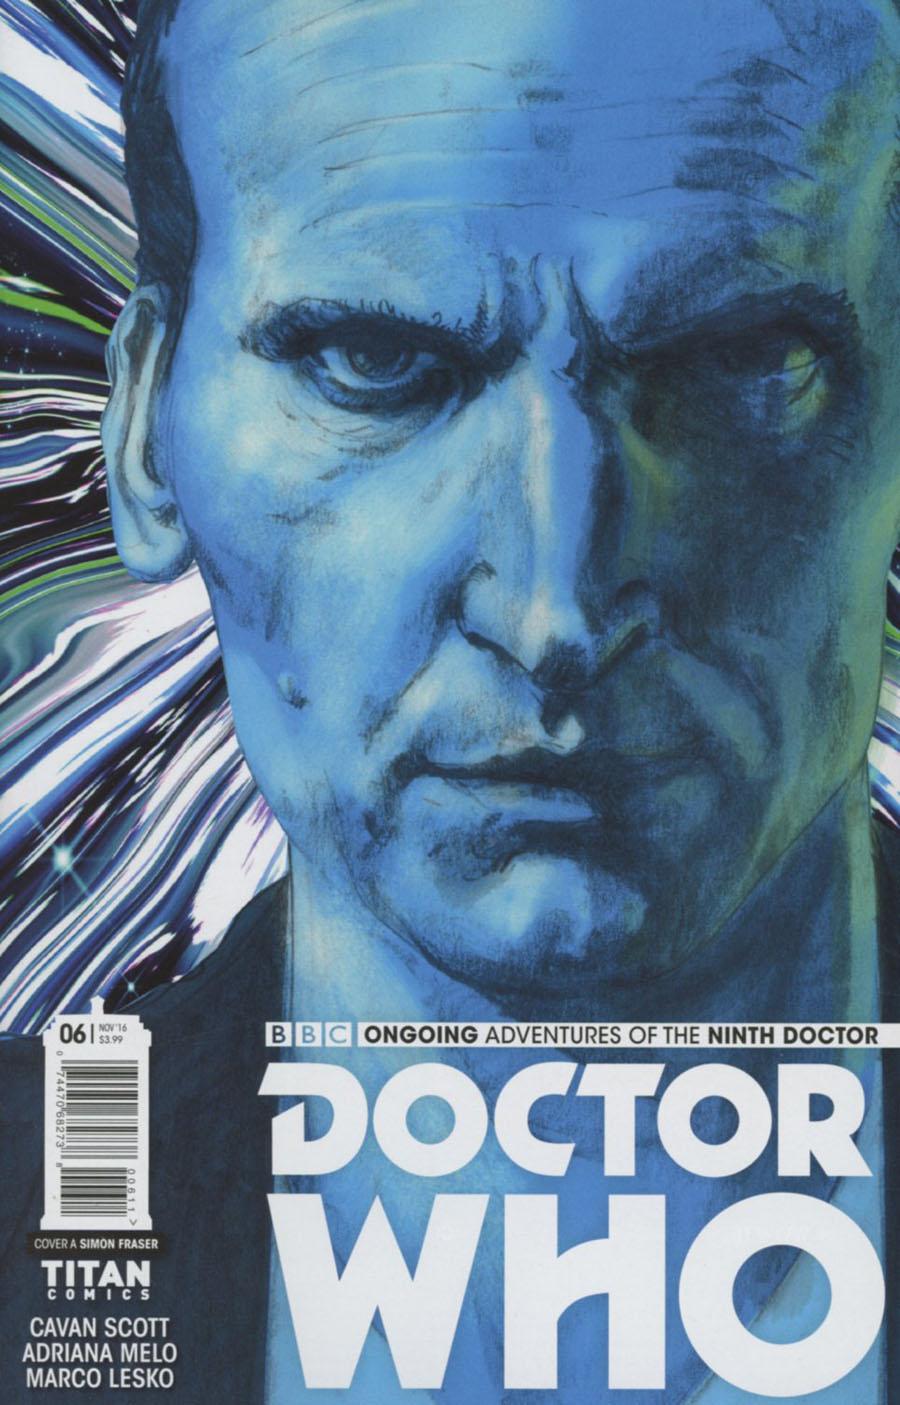 Doctor Who 9th Doctor Vol. 2 #6